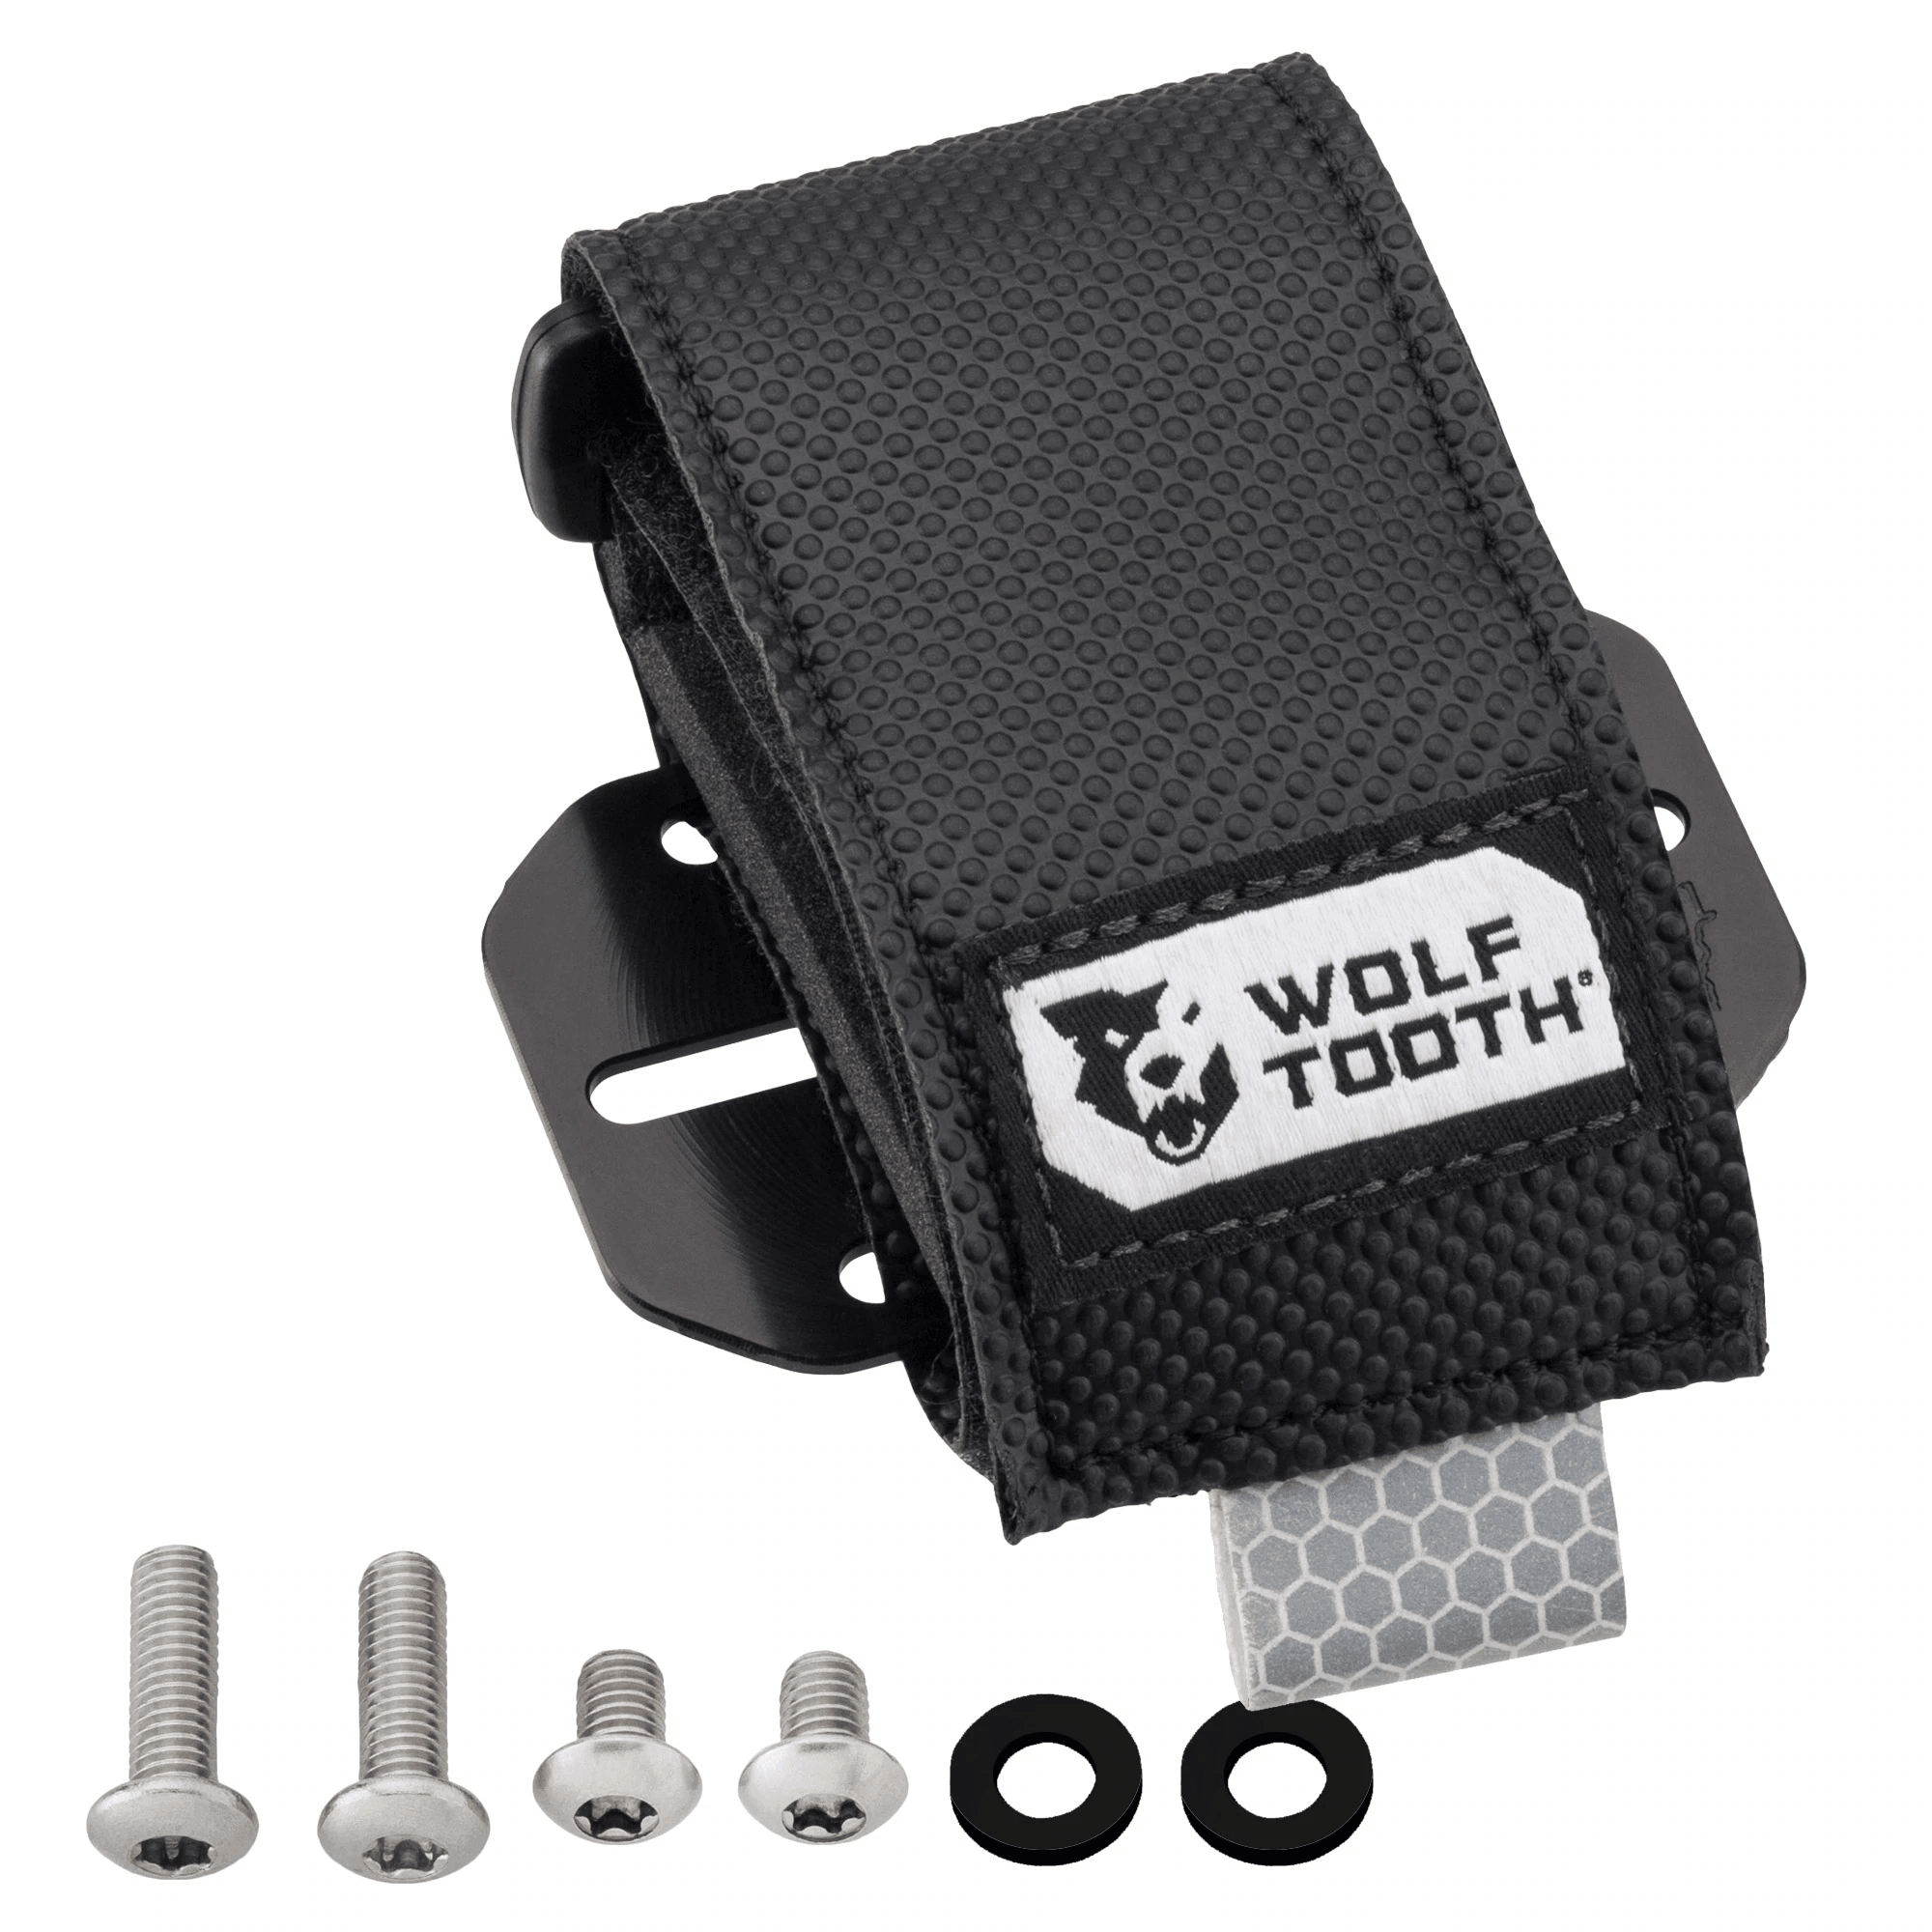 Wolf Tooth Components B-RAD Accessory Strap Mount Accessories - Bags - Accessory Bags & Straps